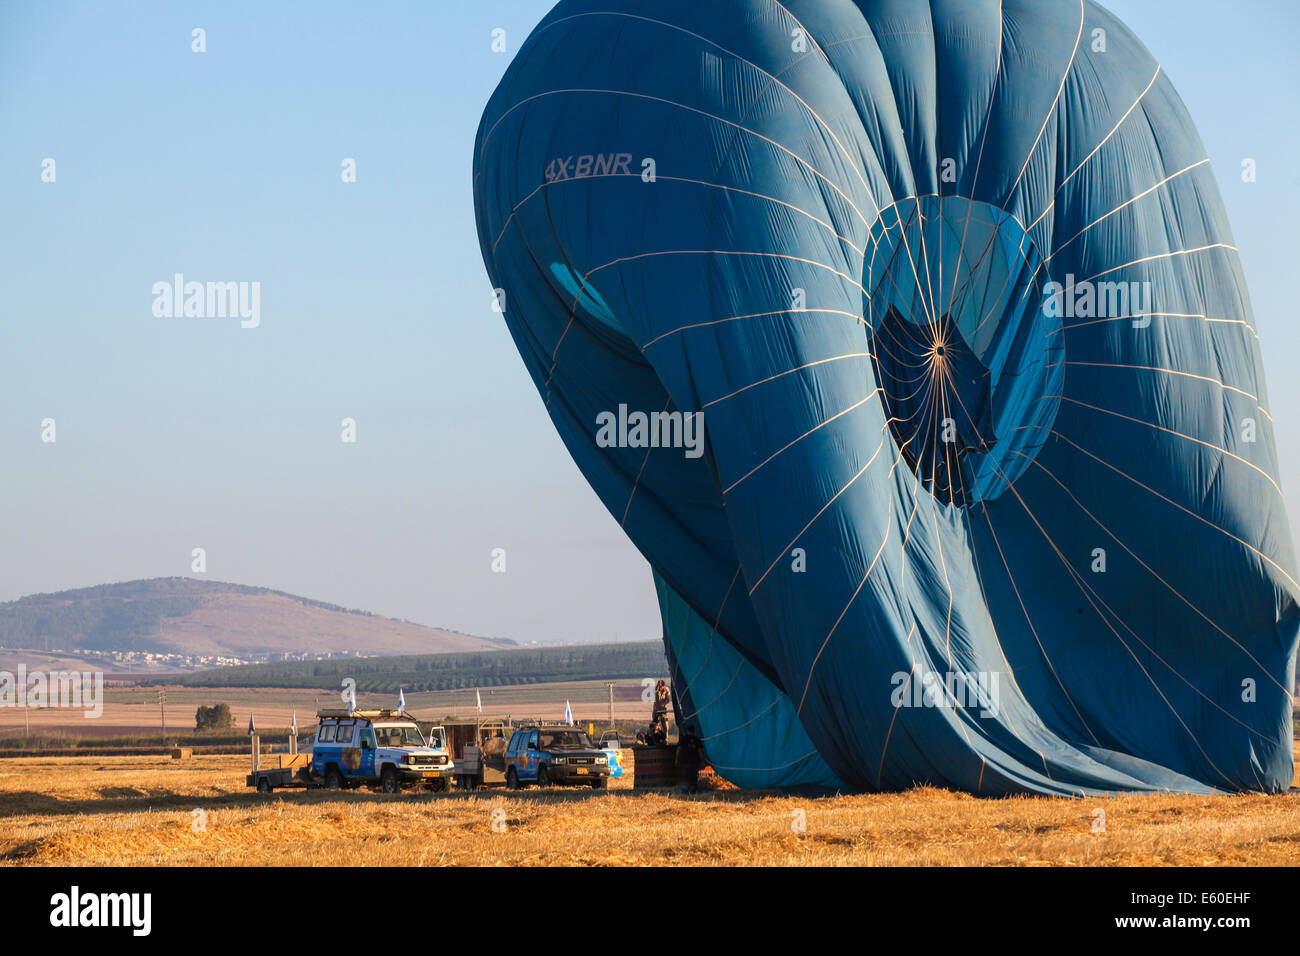 Hot air balloon being deflated. Photographed in the Jezreel Valley, Israel Mount Gilboa in the background Stock Photo